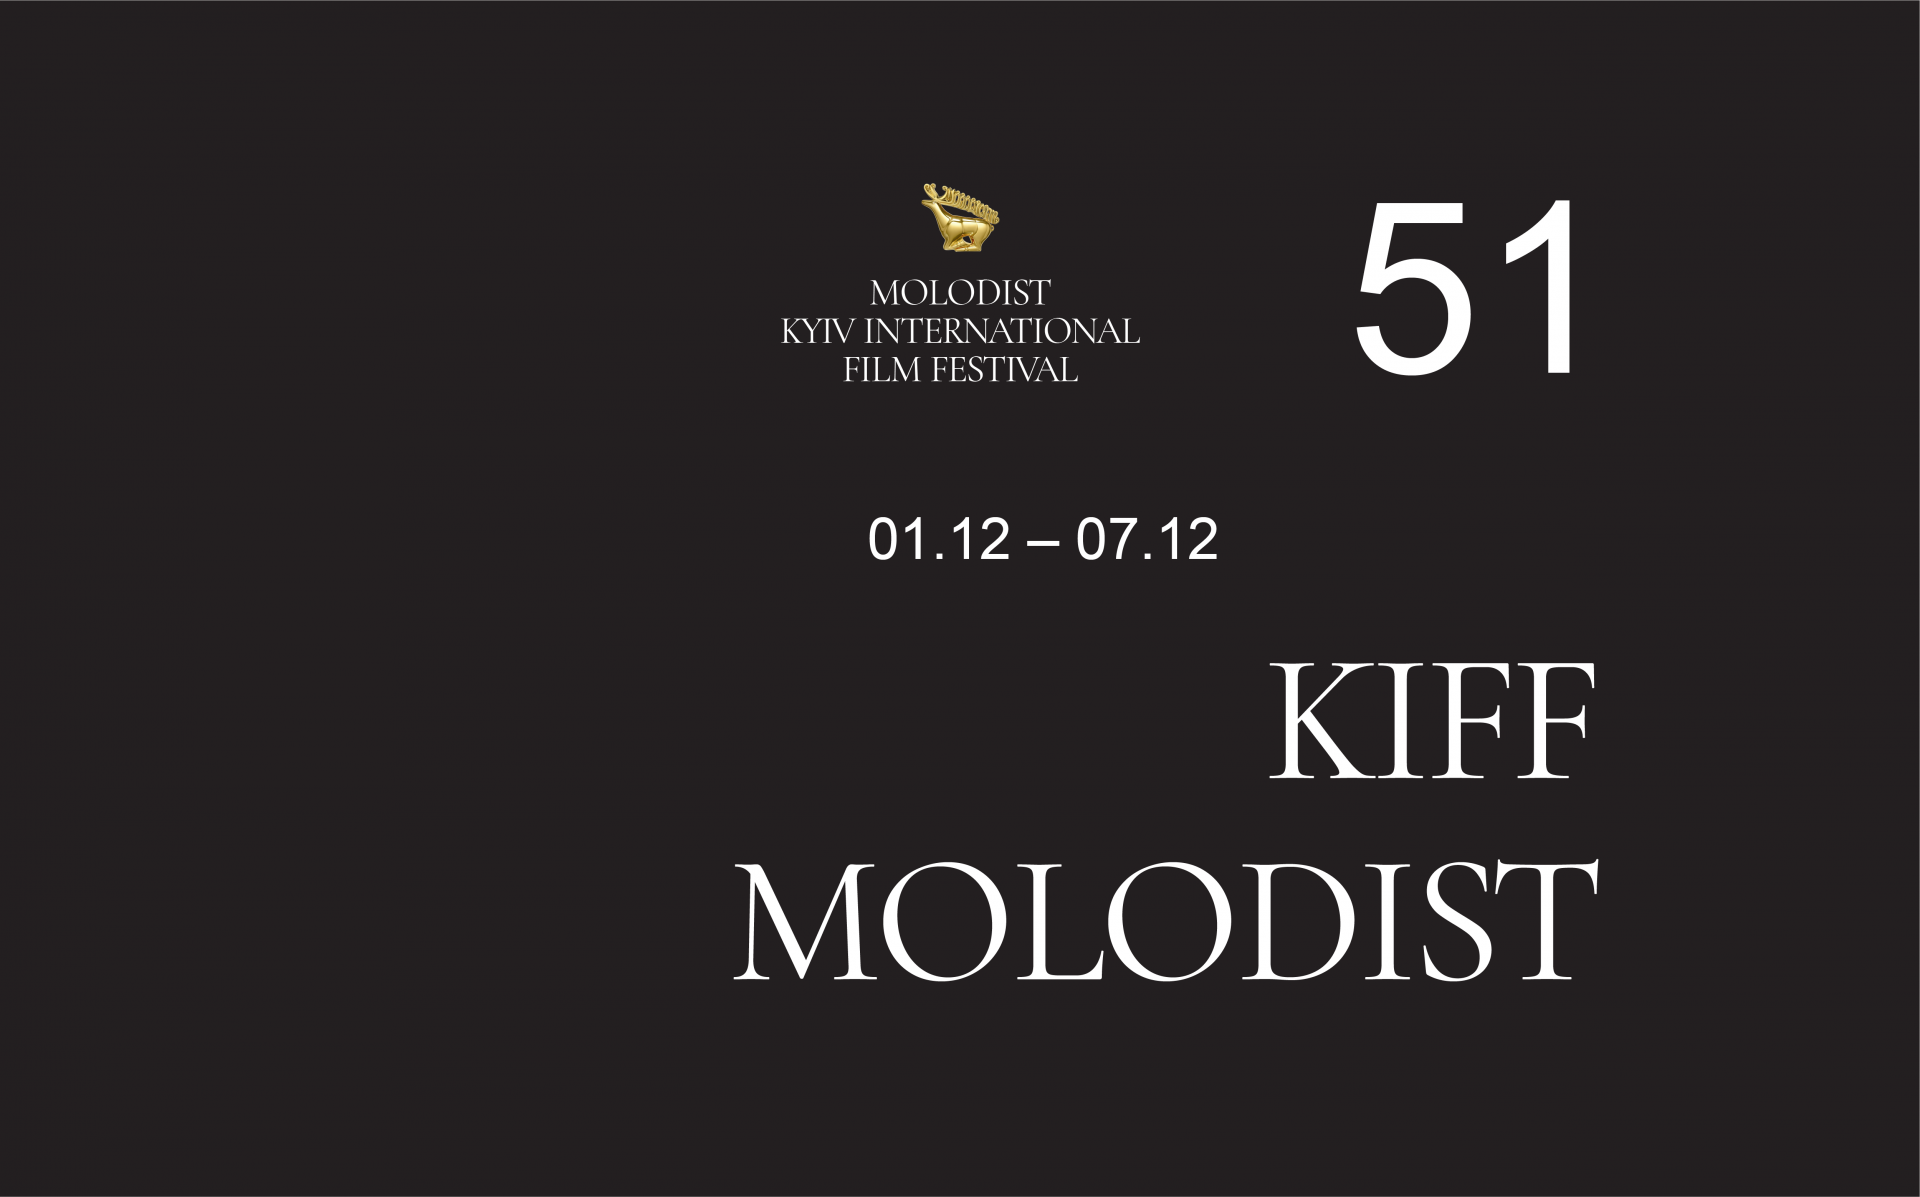 51st Kyiv International Film Festival Molodist to take place December 1-3  with support of President's Office of Ukraine